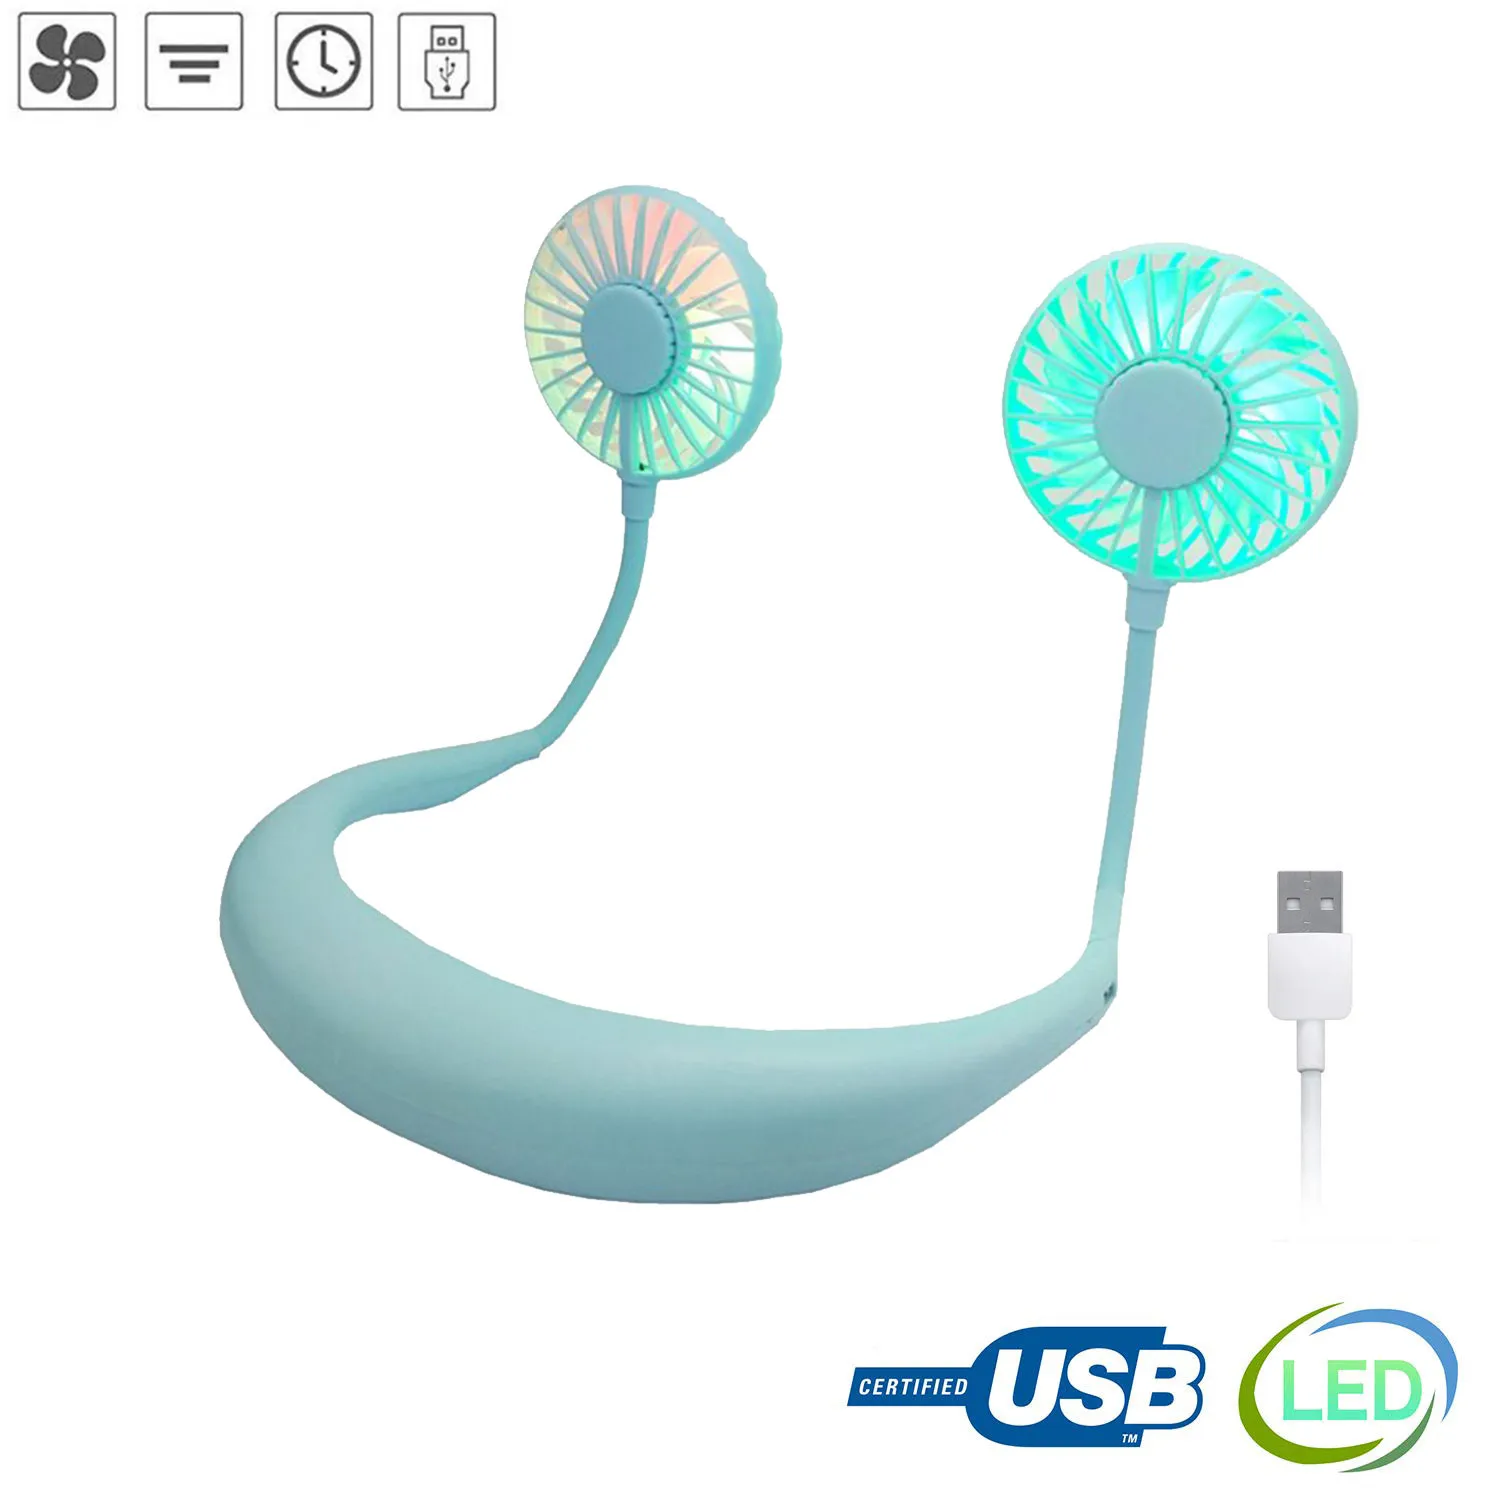 

Portable USB Fan Rechargeable Neckband Lazy Neck Hanging Style Dual Cooling Fan Super strong wind Sports Mini Hand Free Fan